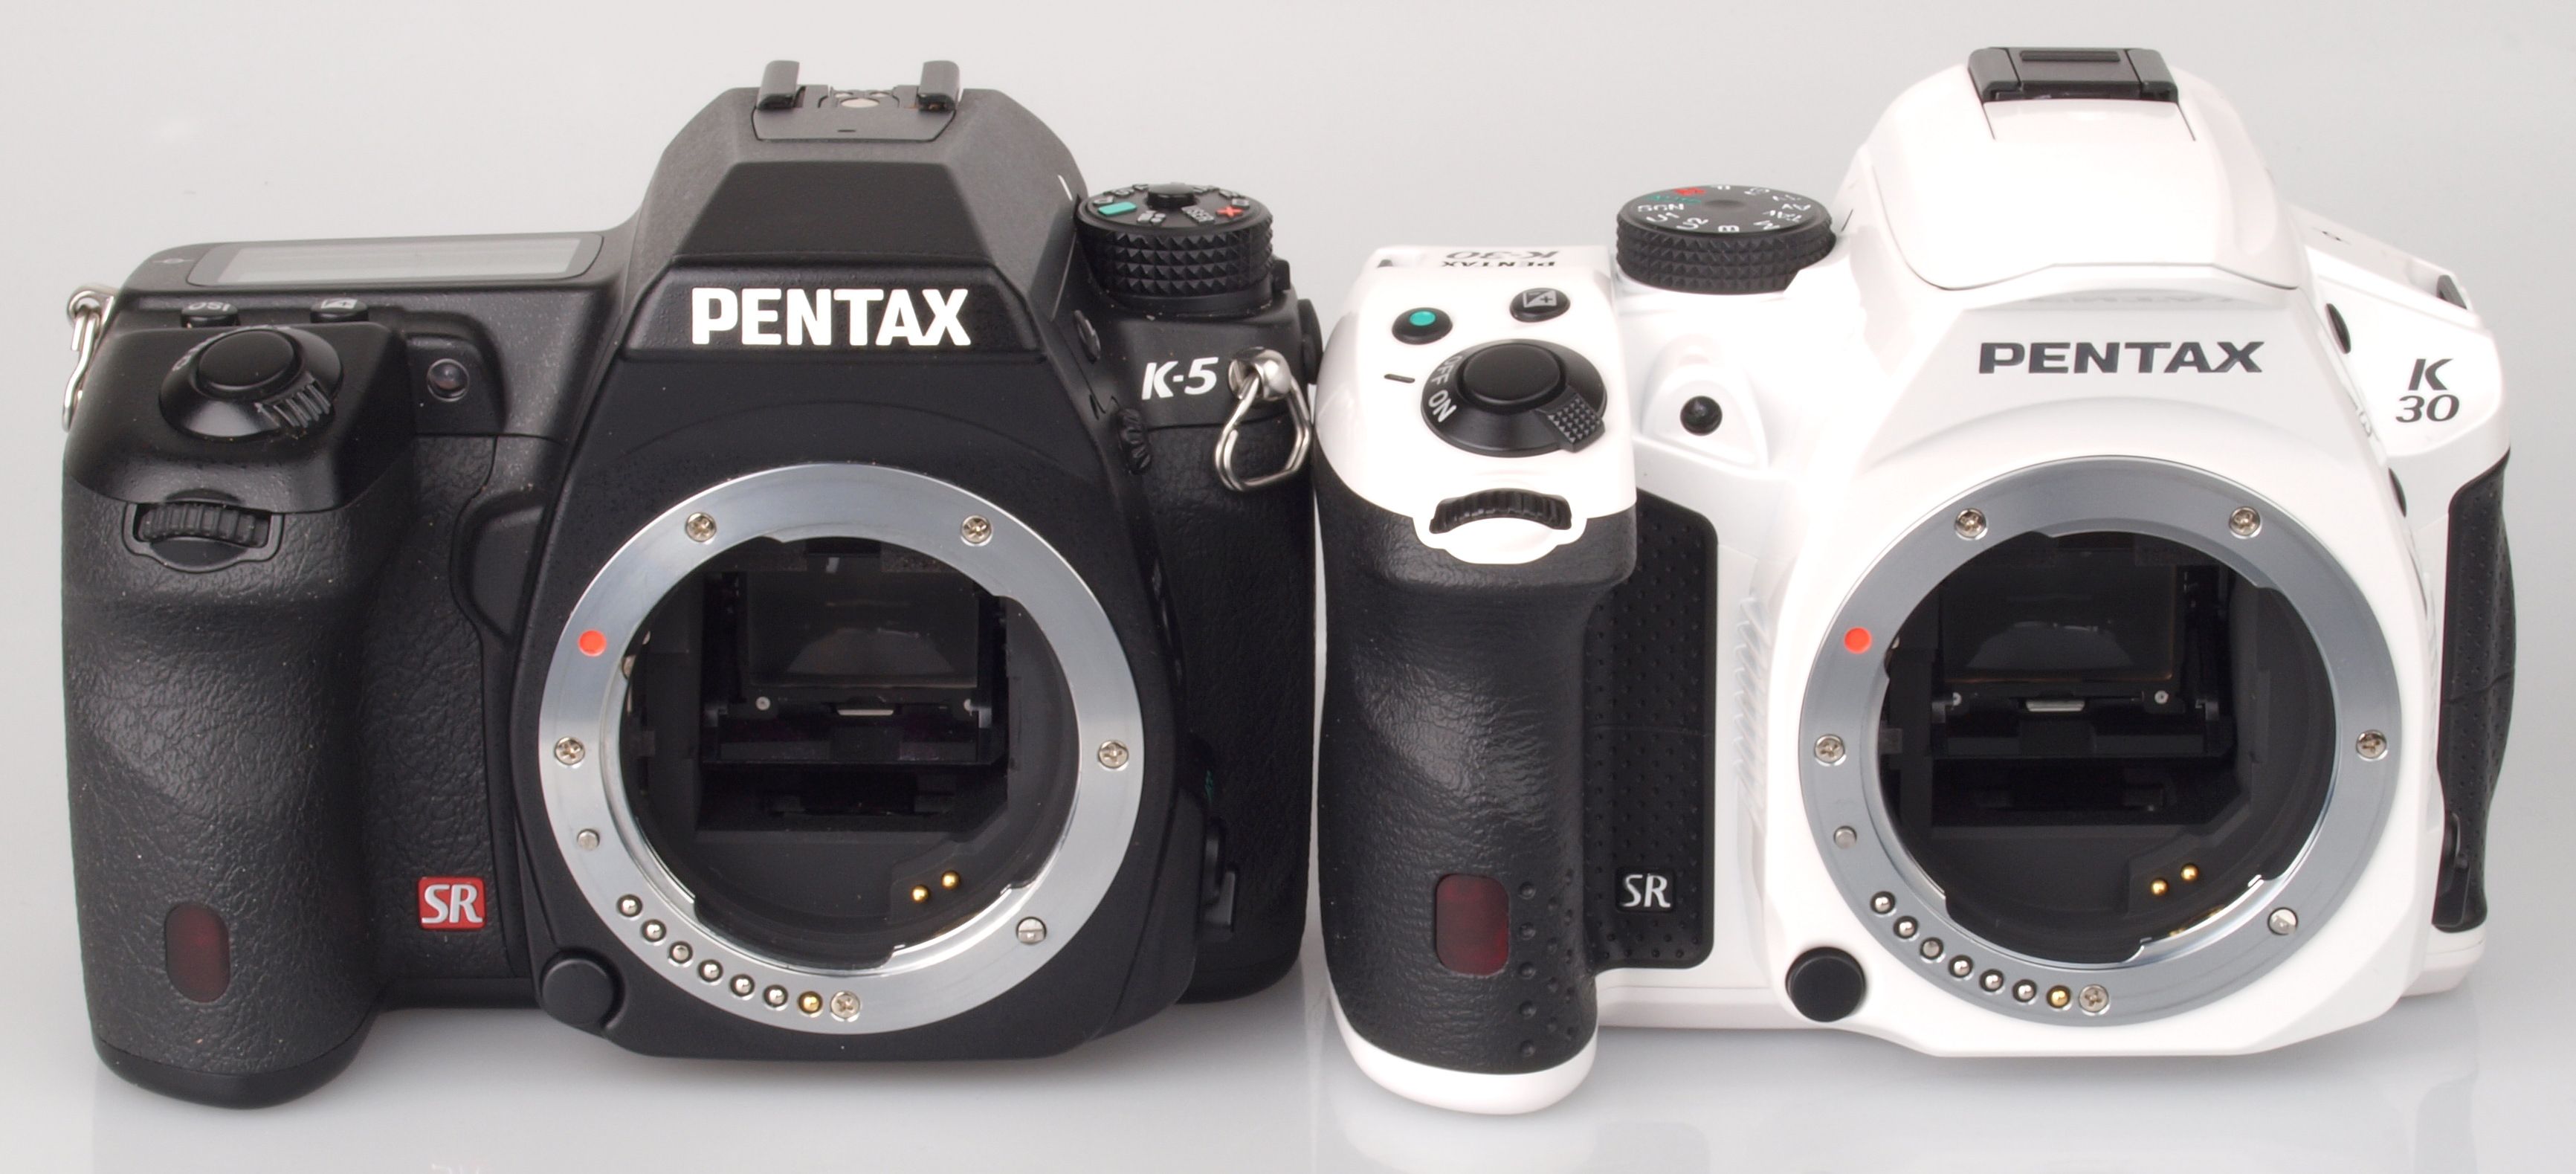 Highres Pentax K5 Side by Side With Pentax K30 1 1343306004